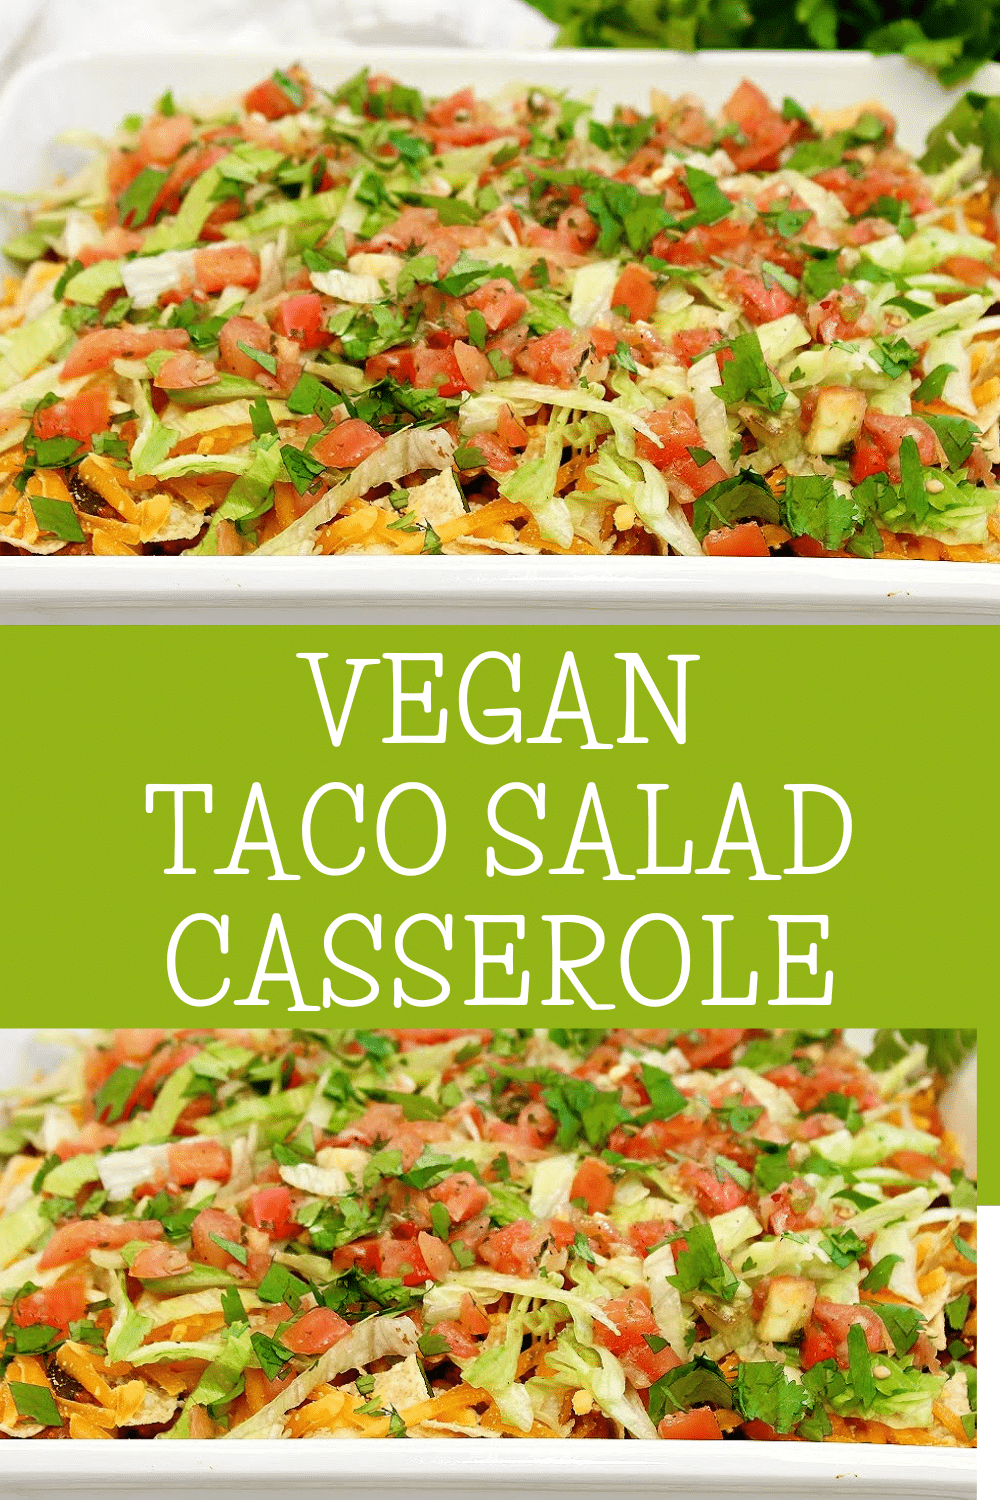 Taco Salad Casserole ~ Everything you love about taco salad in a satisfying and easy-to-make casserole! Ready to serve in about 30 minutes. via @thiswifecooks